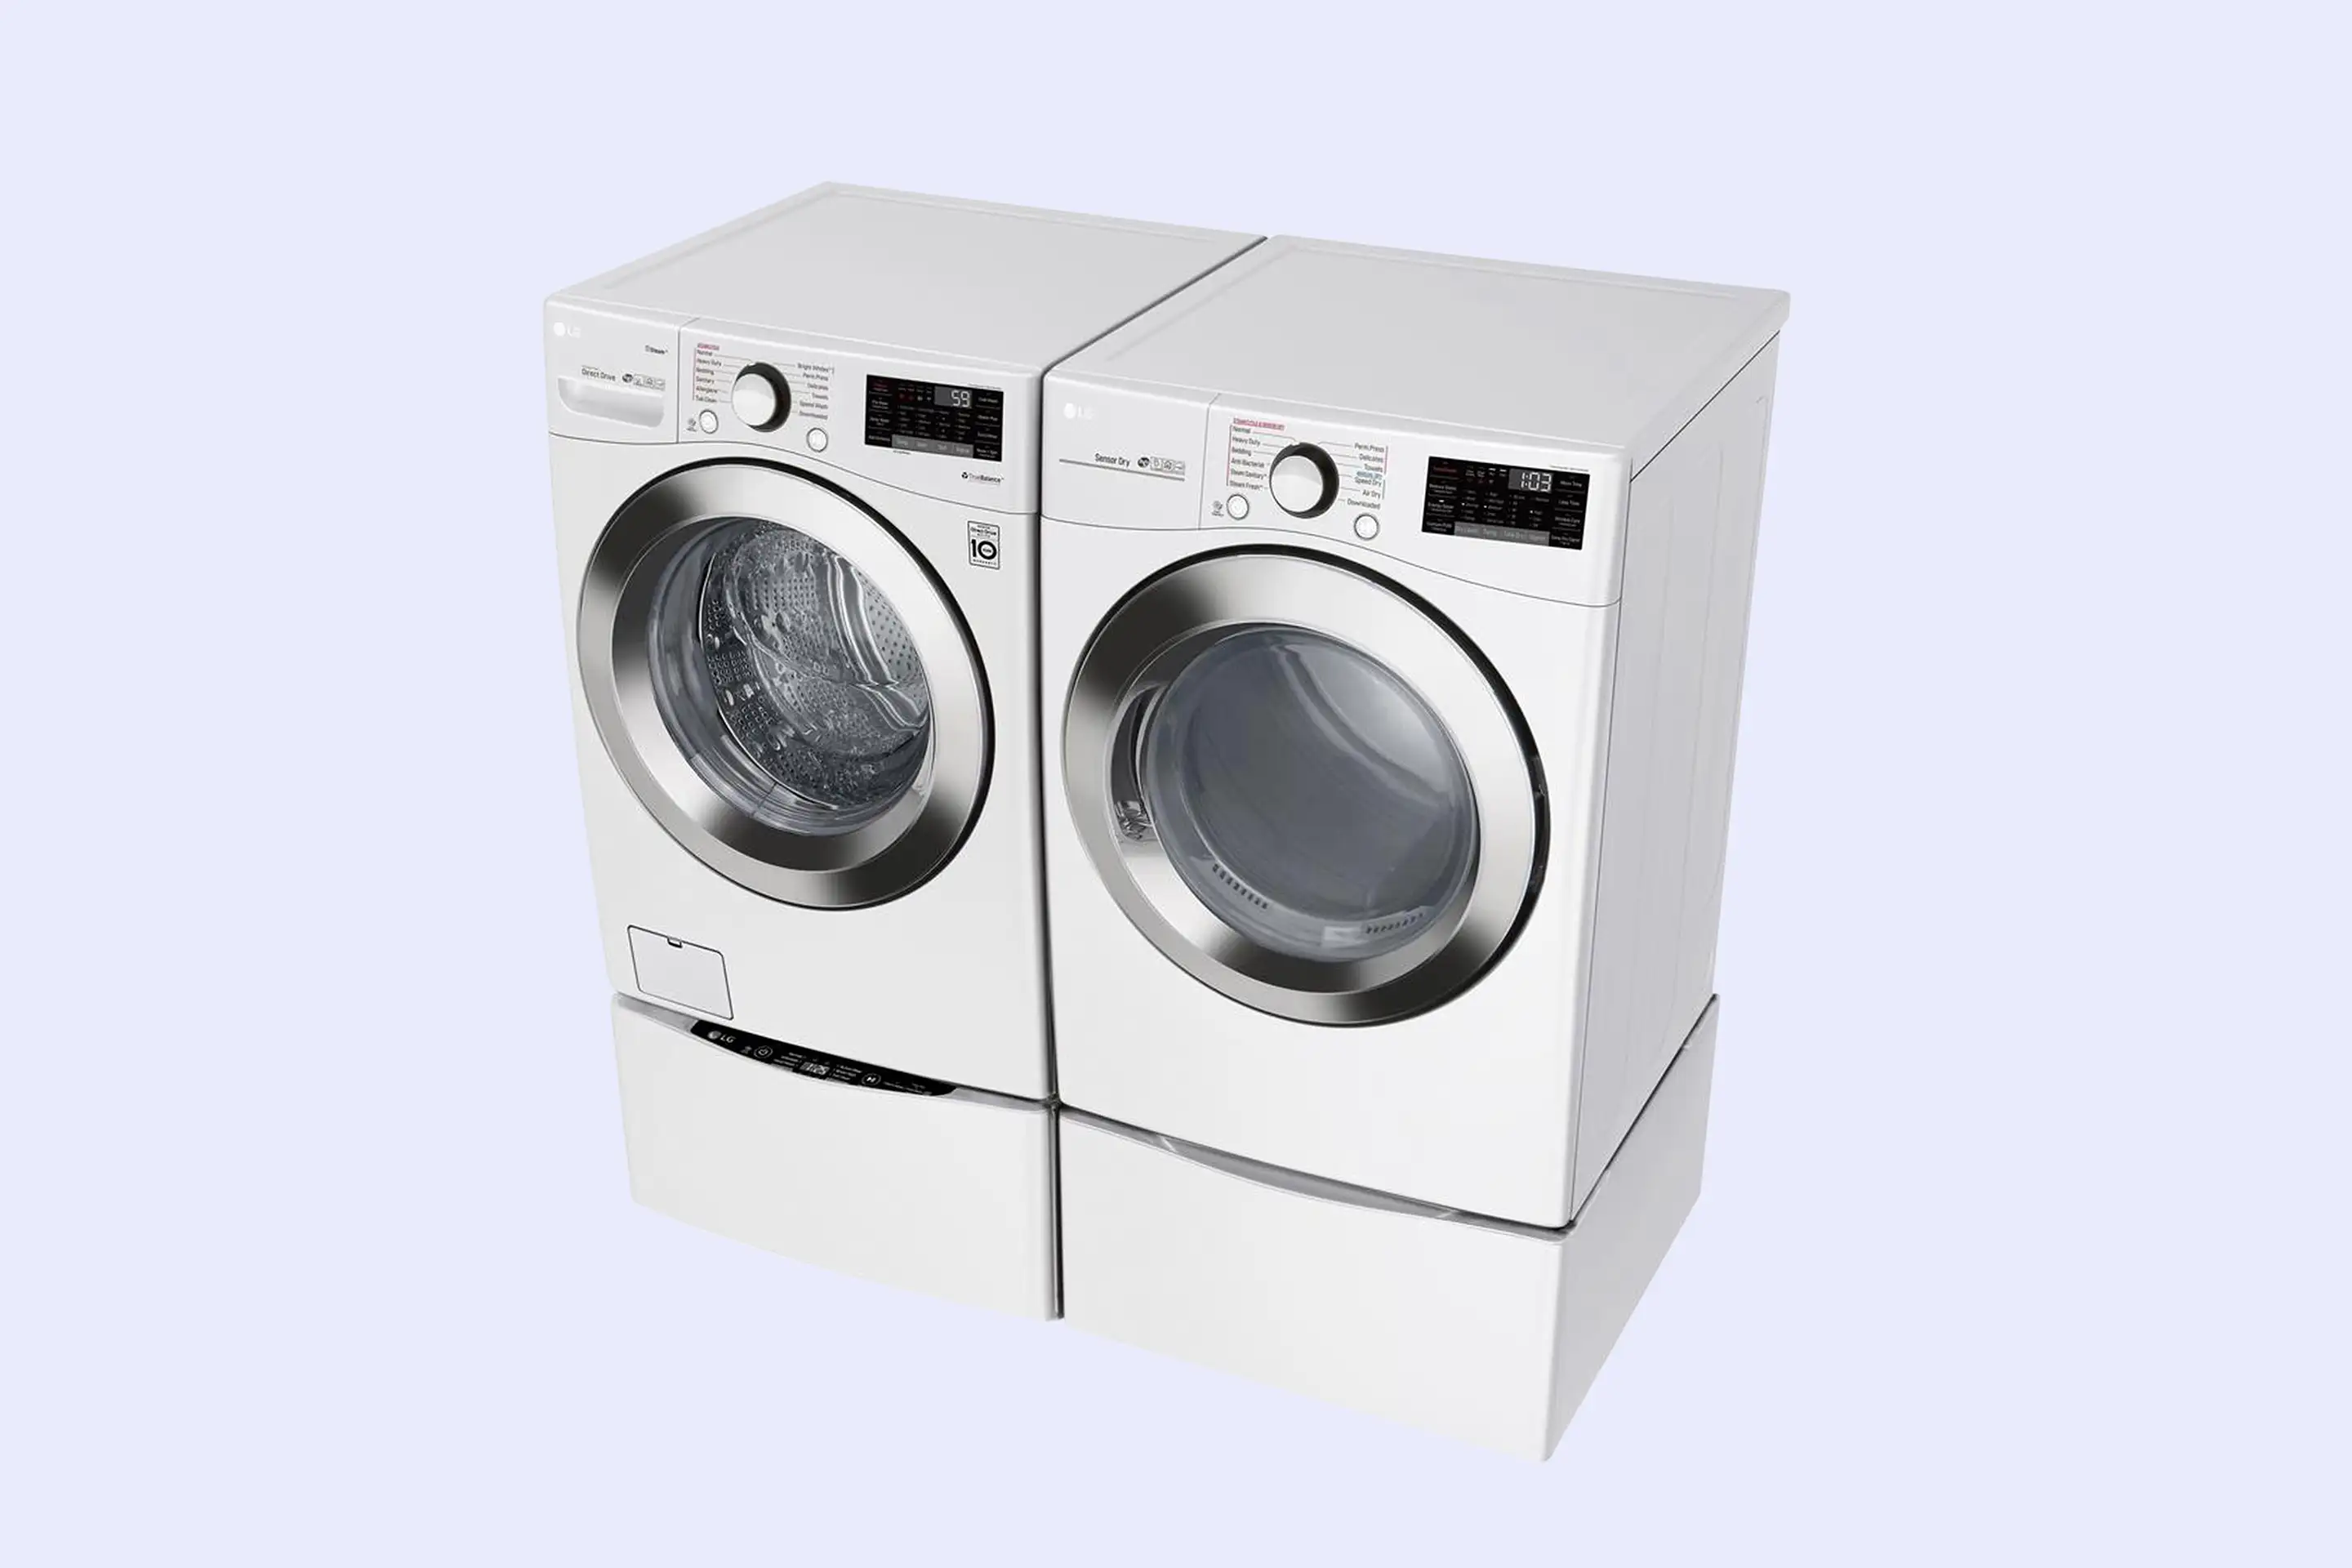 Best Washer And Dryer Updated September 2020 Money